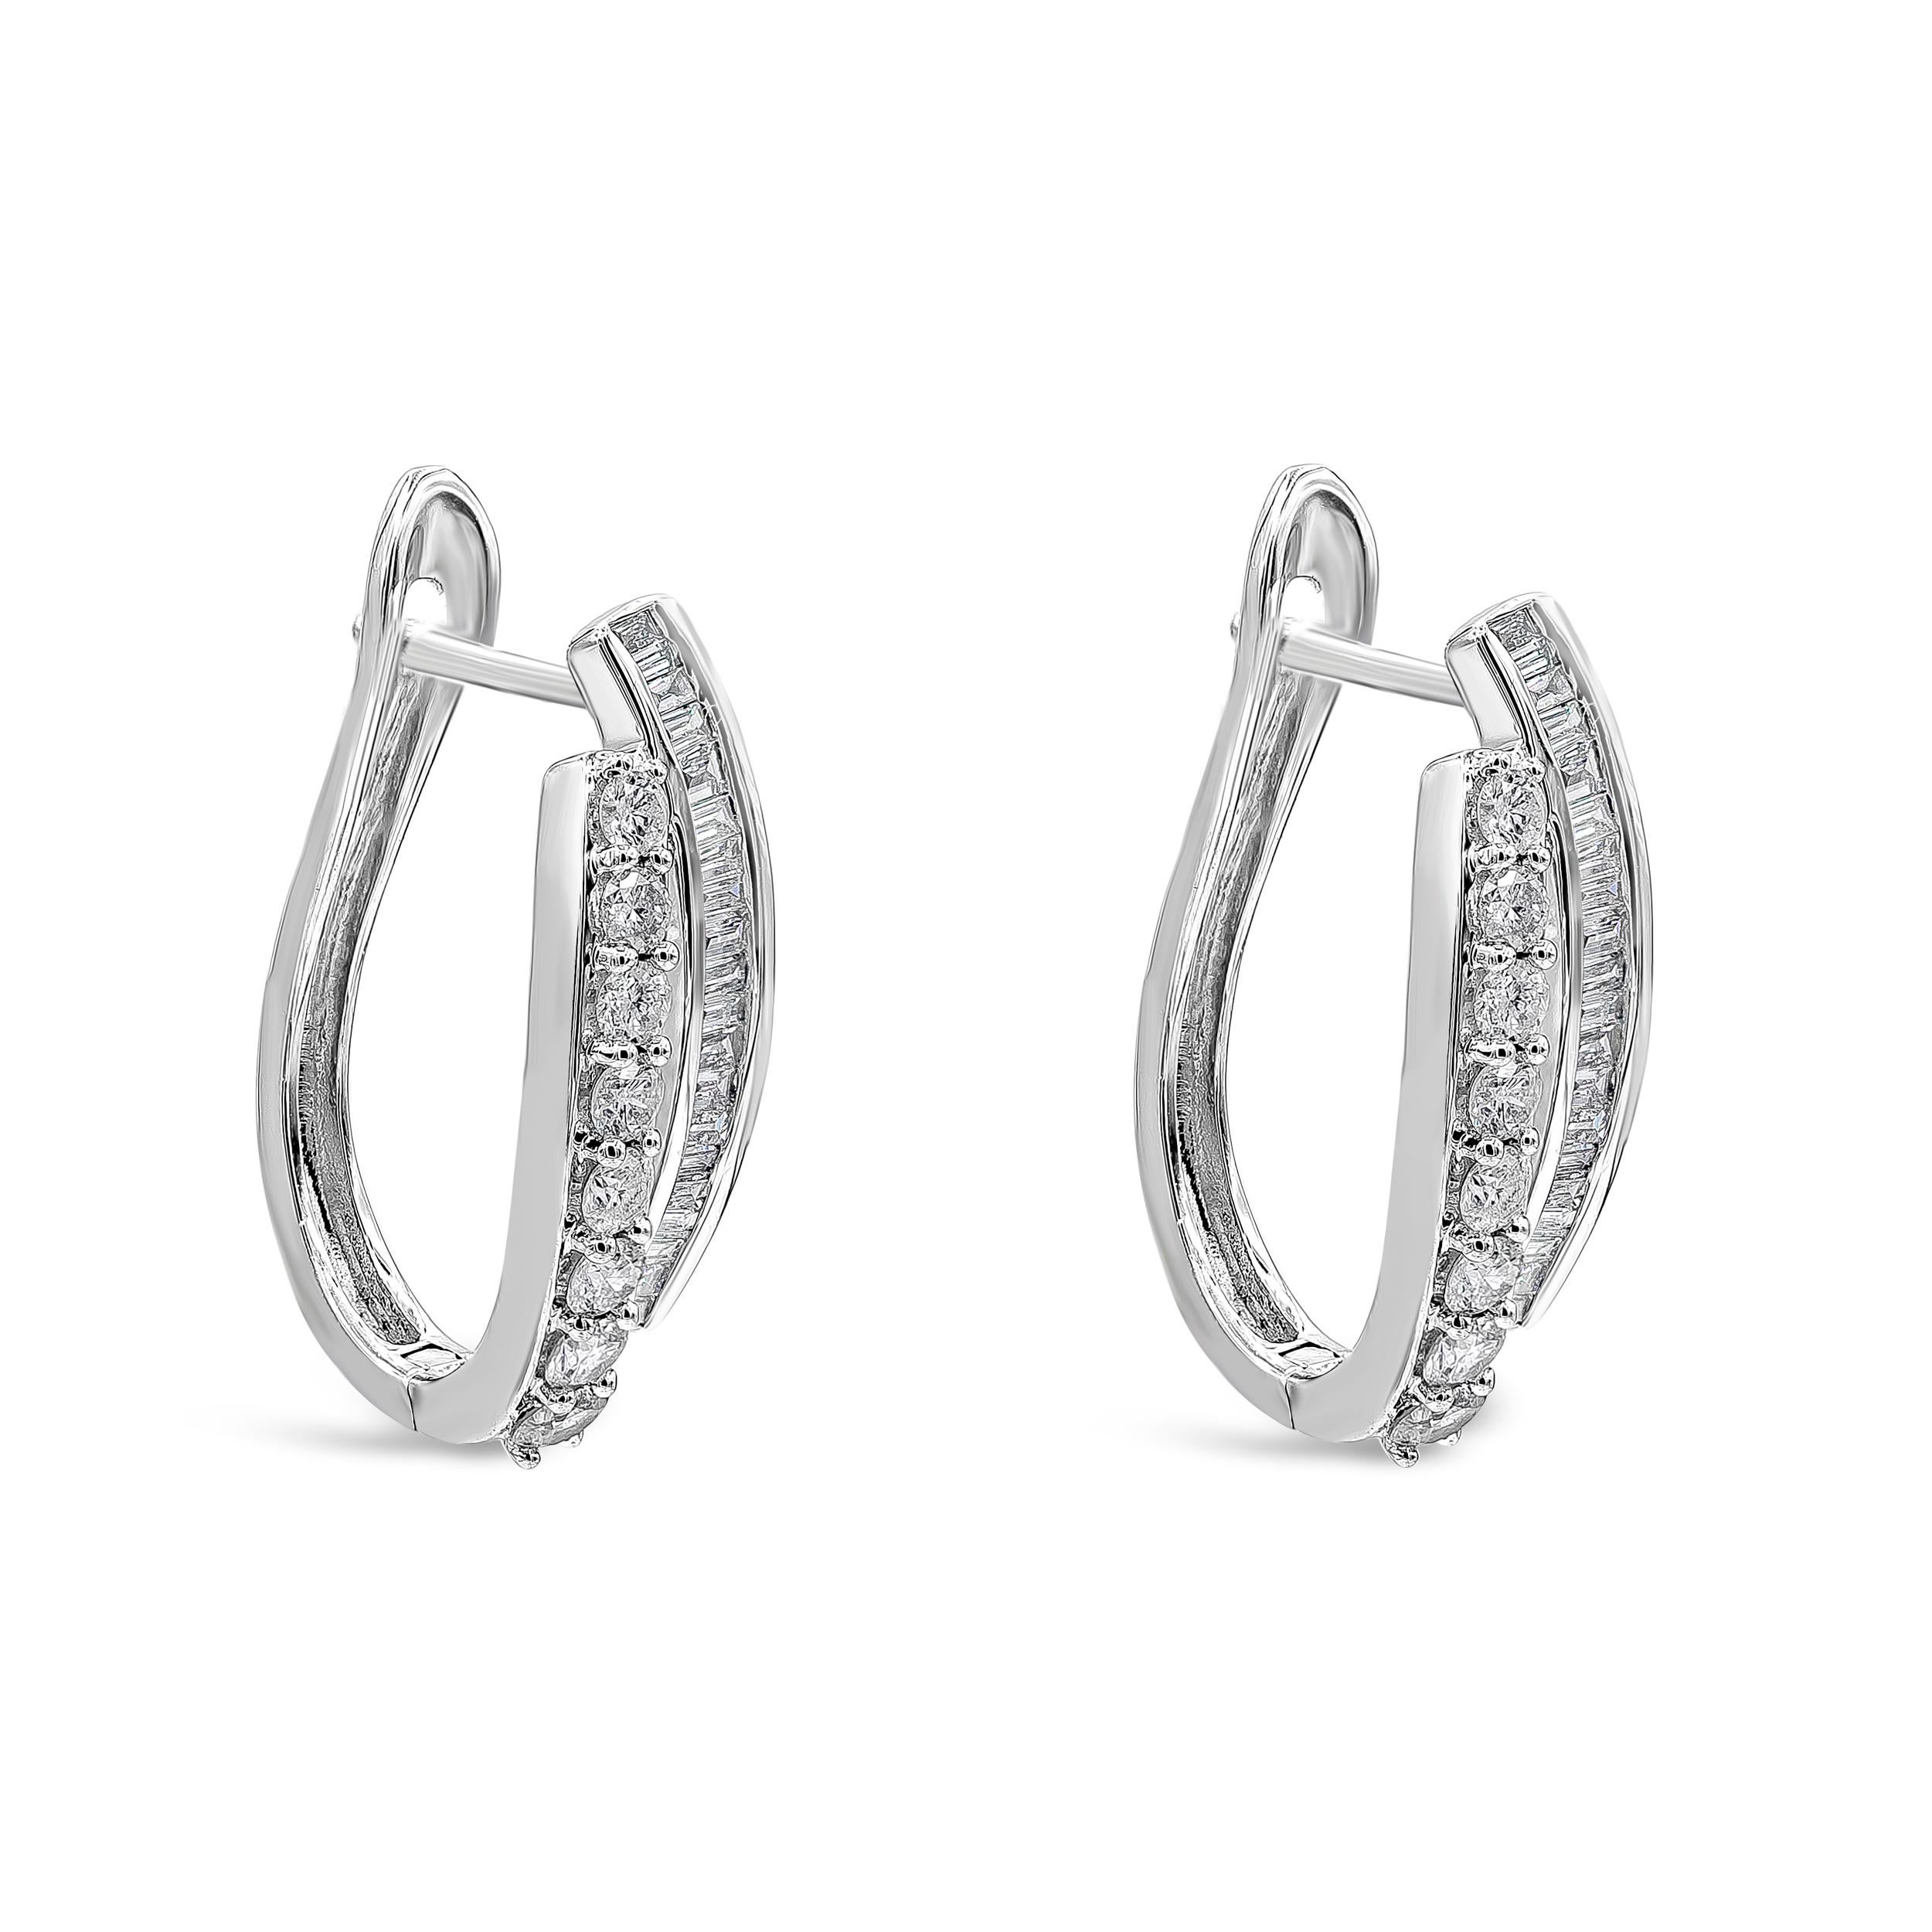 A unique pair of hoop earrings showcasing a row of brilliant round diamonds set in a shared prong setting and a row of baguette diamonds set in a channel set weighing 1.34 carats total. Made in 10K white gold.

Style available in different price